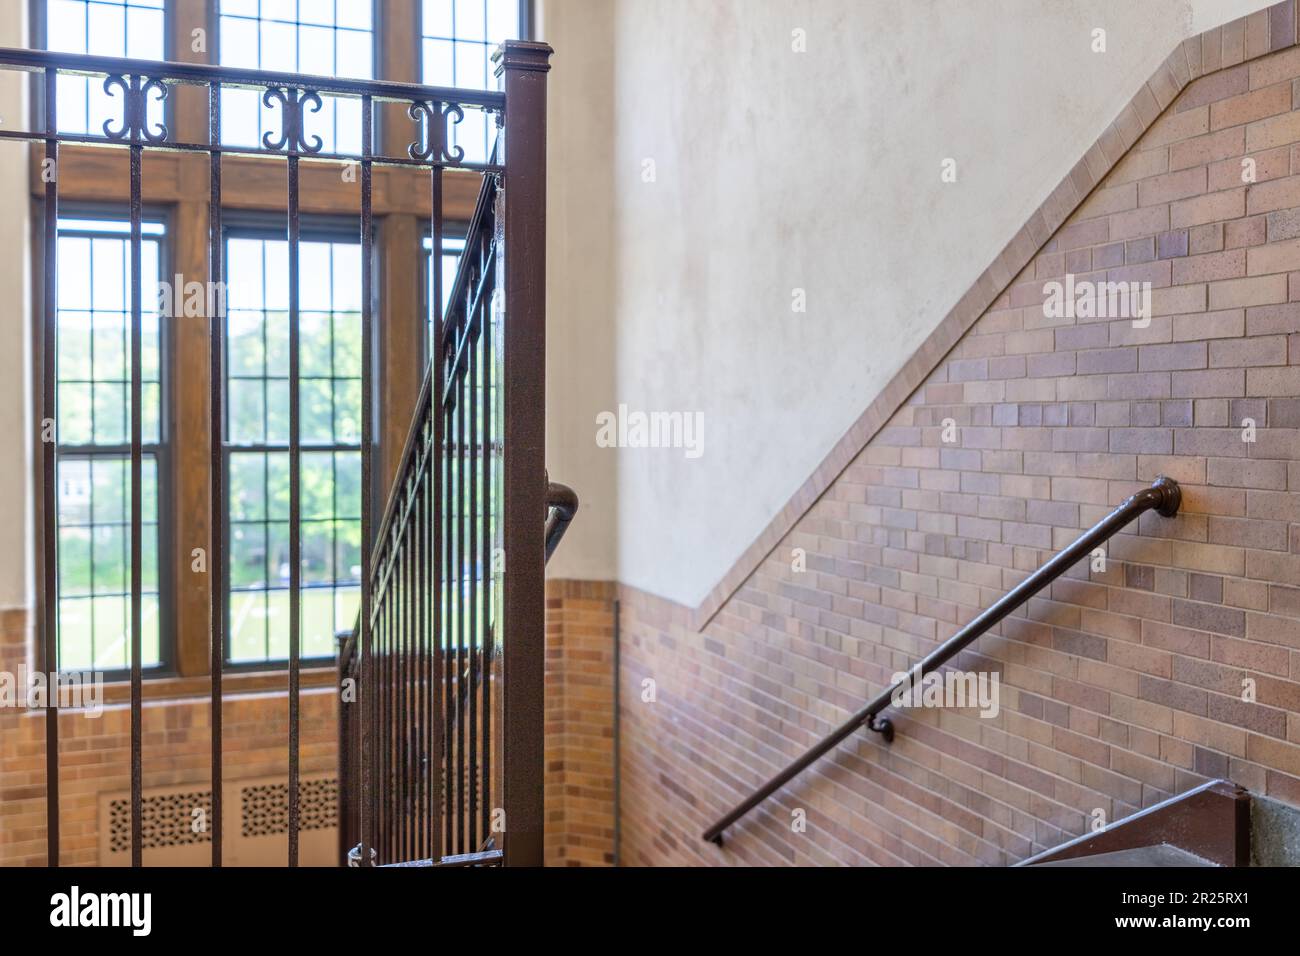 Nondescript stairway, hallway, with windows and brown railing, in a typical old US institutional building. Stock Photo